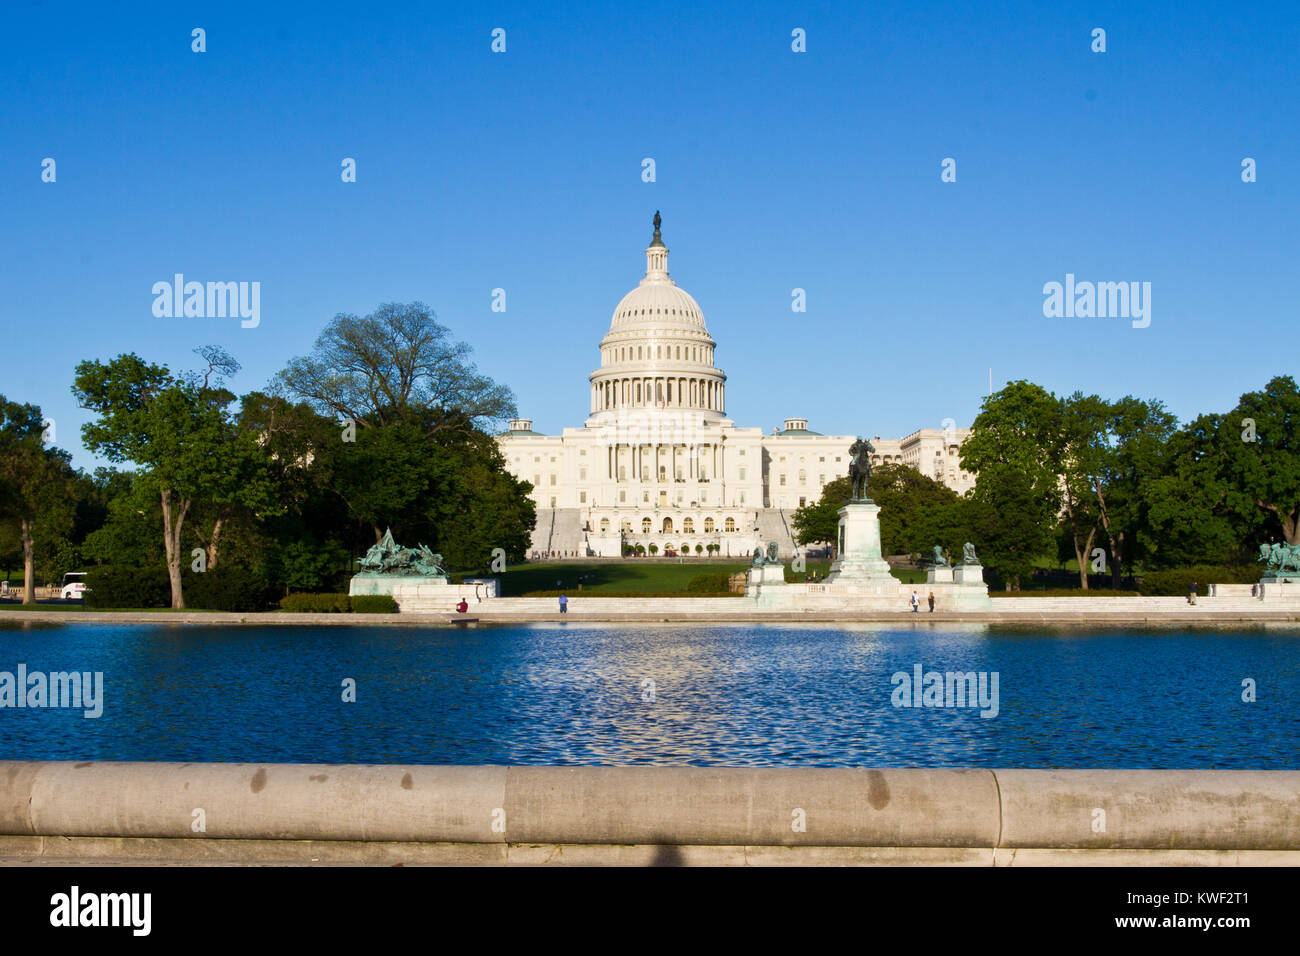 United States Capitol Building, Washington DC, is the home of the US Congress, and the seat of the legislative branch of the U.S. federal government. Stock Photo